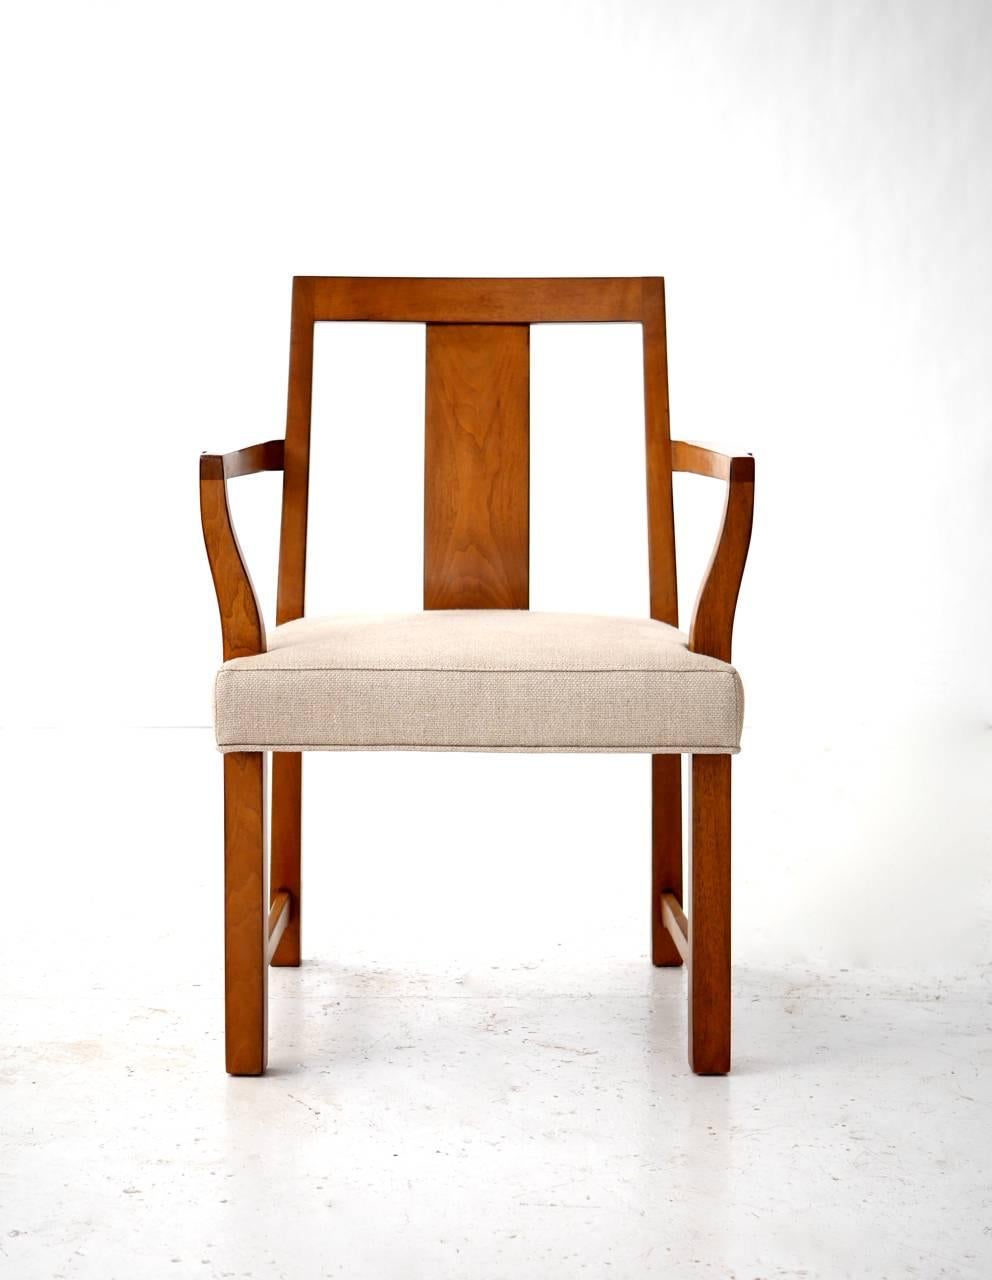 Dunbar model #295W armchair and 294W side chair reupholstered in natural linen.